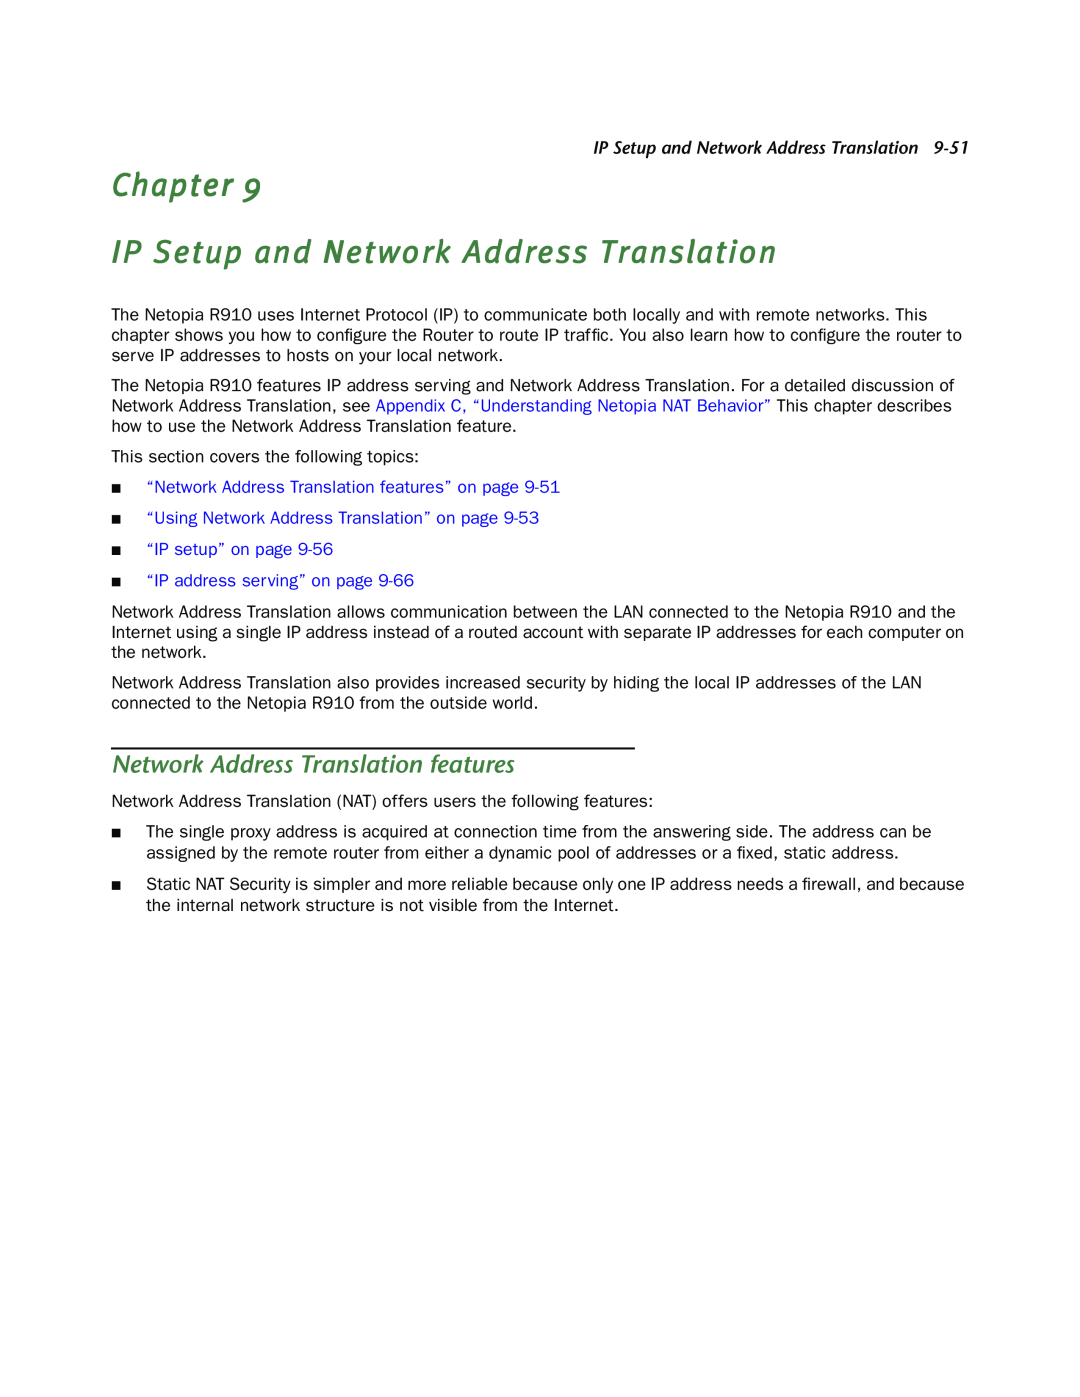 Netopia R910 manual Chapter IP Setup and Network Address Translation, Network Address Translation features 